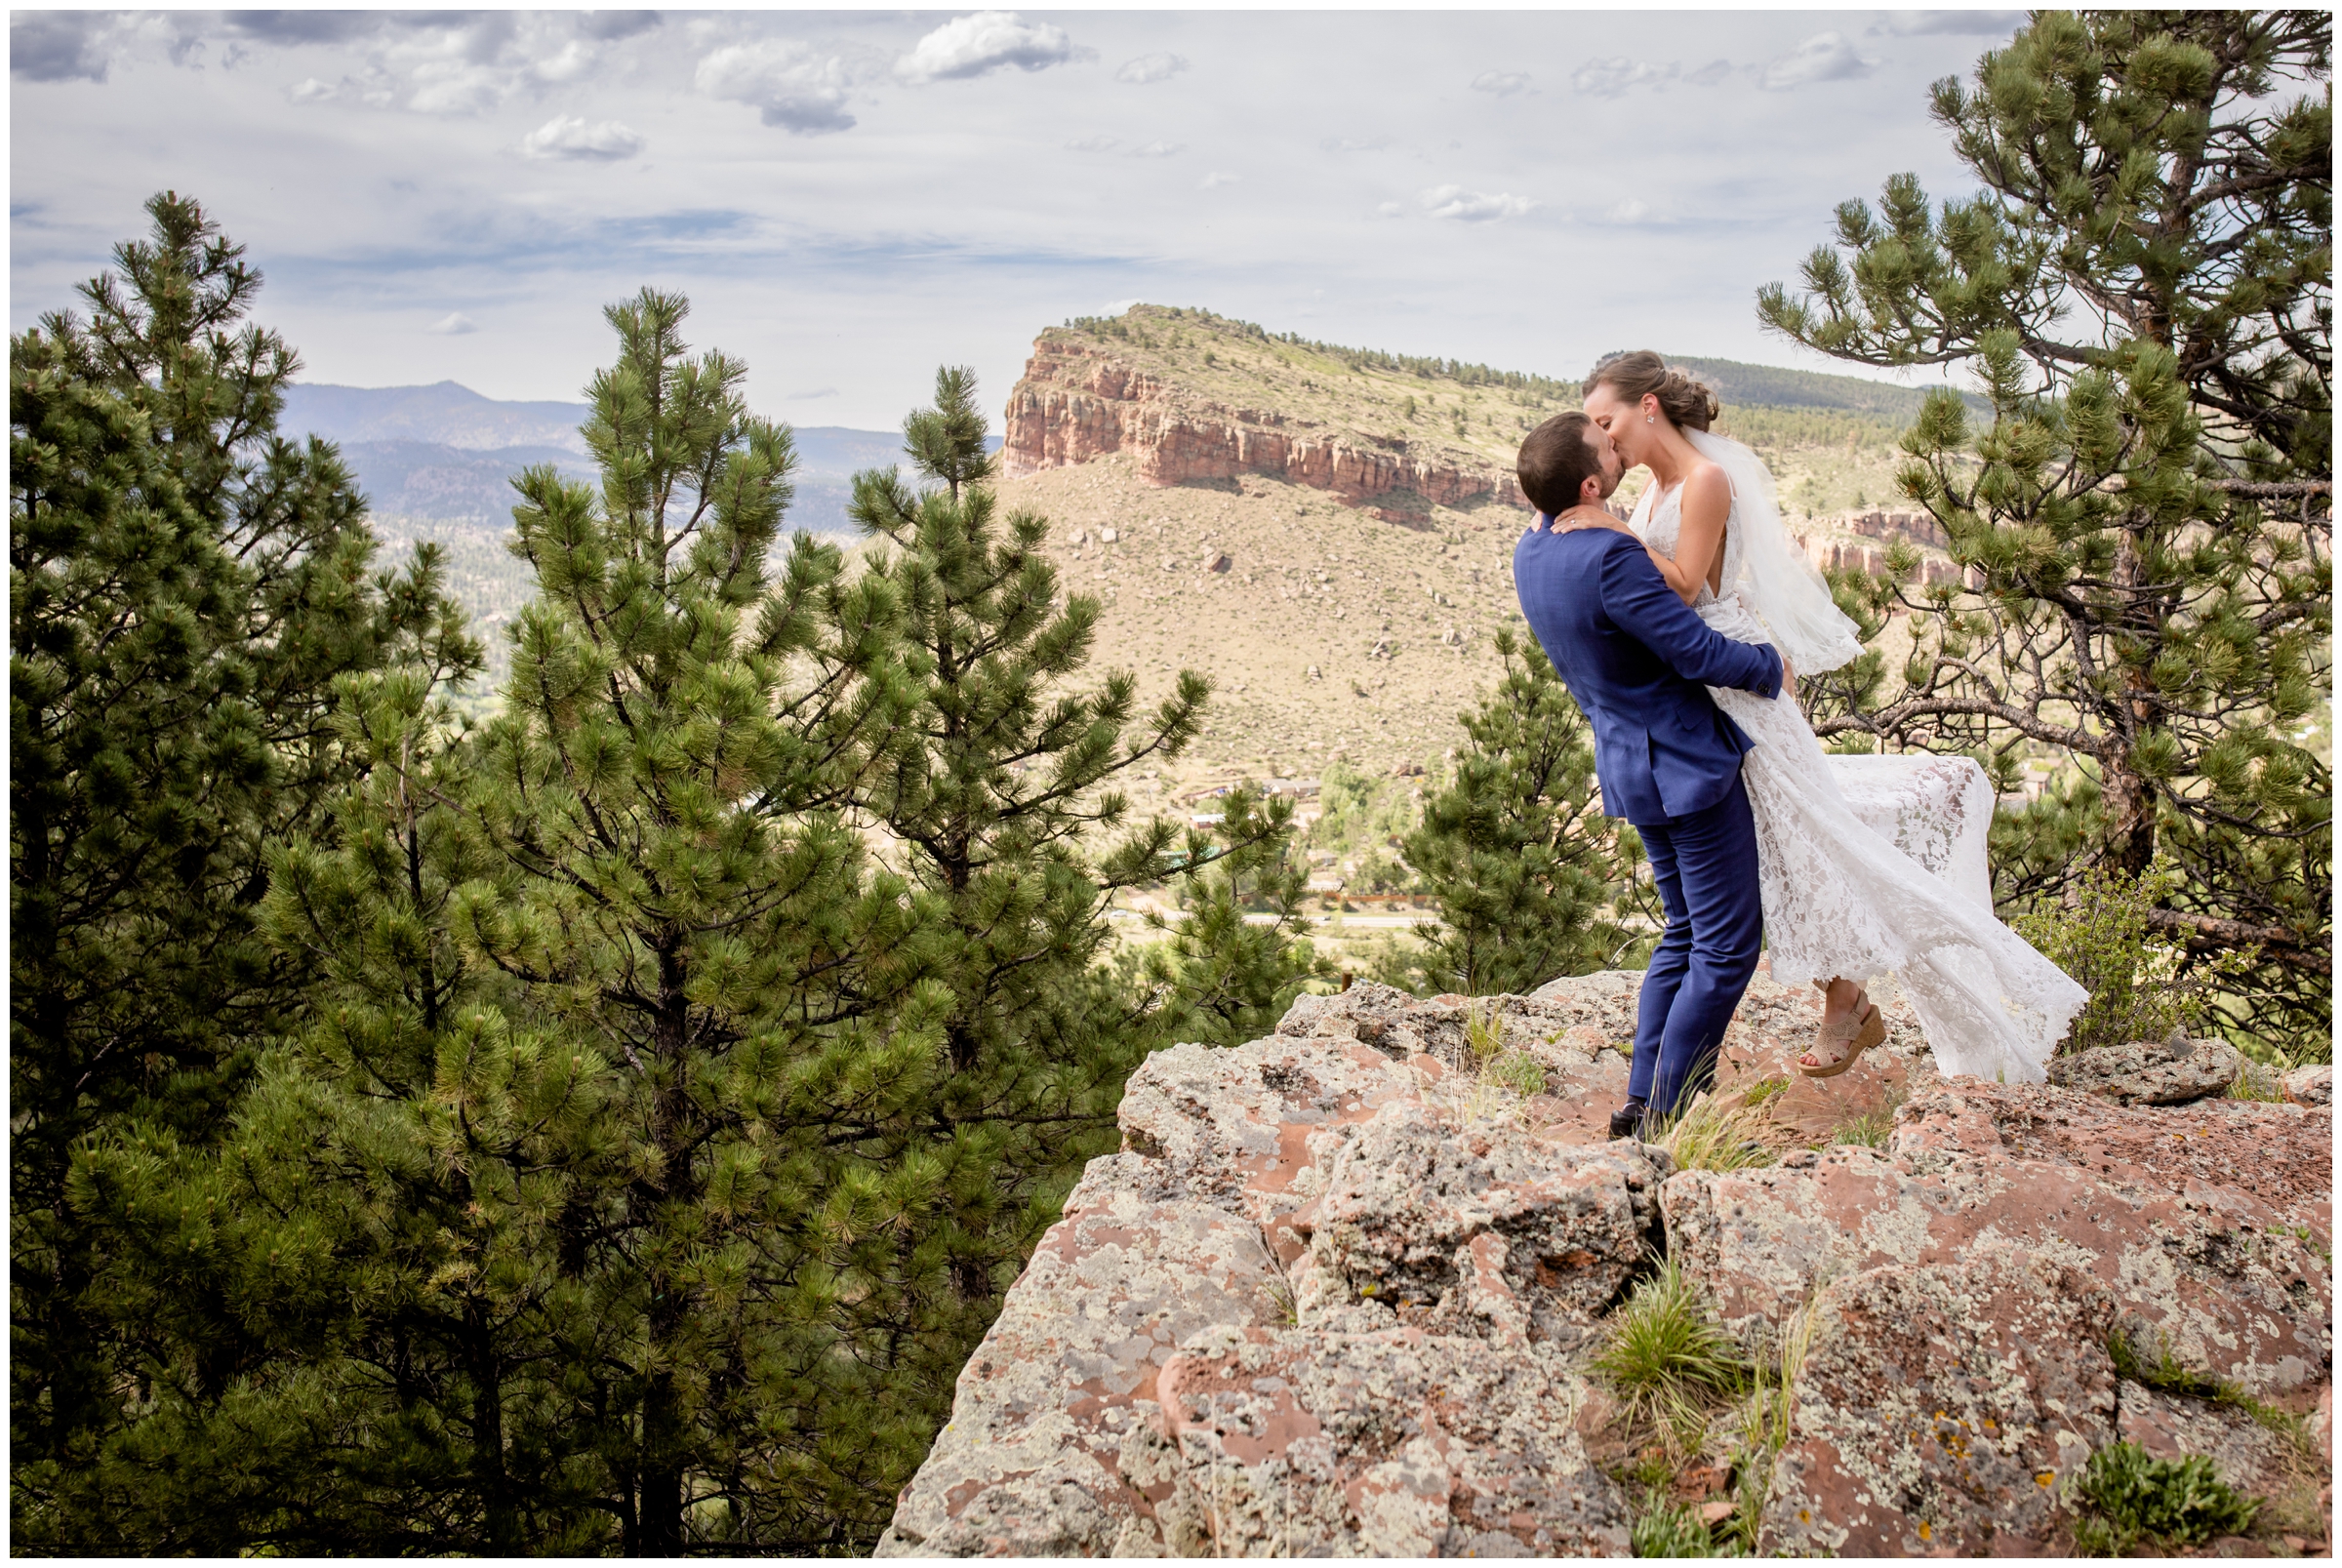 groom lifting bride in the air during mountain wedding pictures at Lionscrest Manor in Colorado